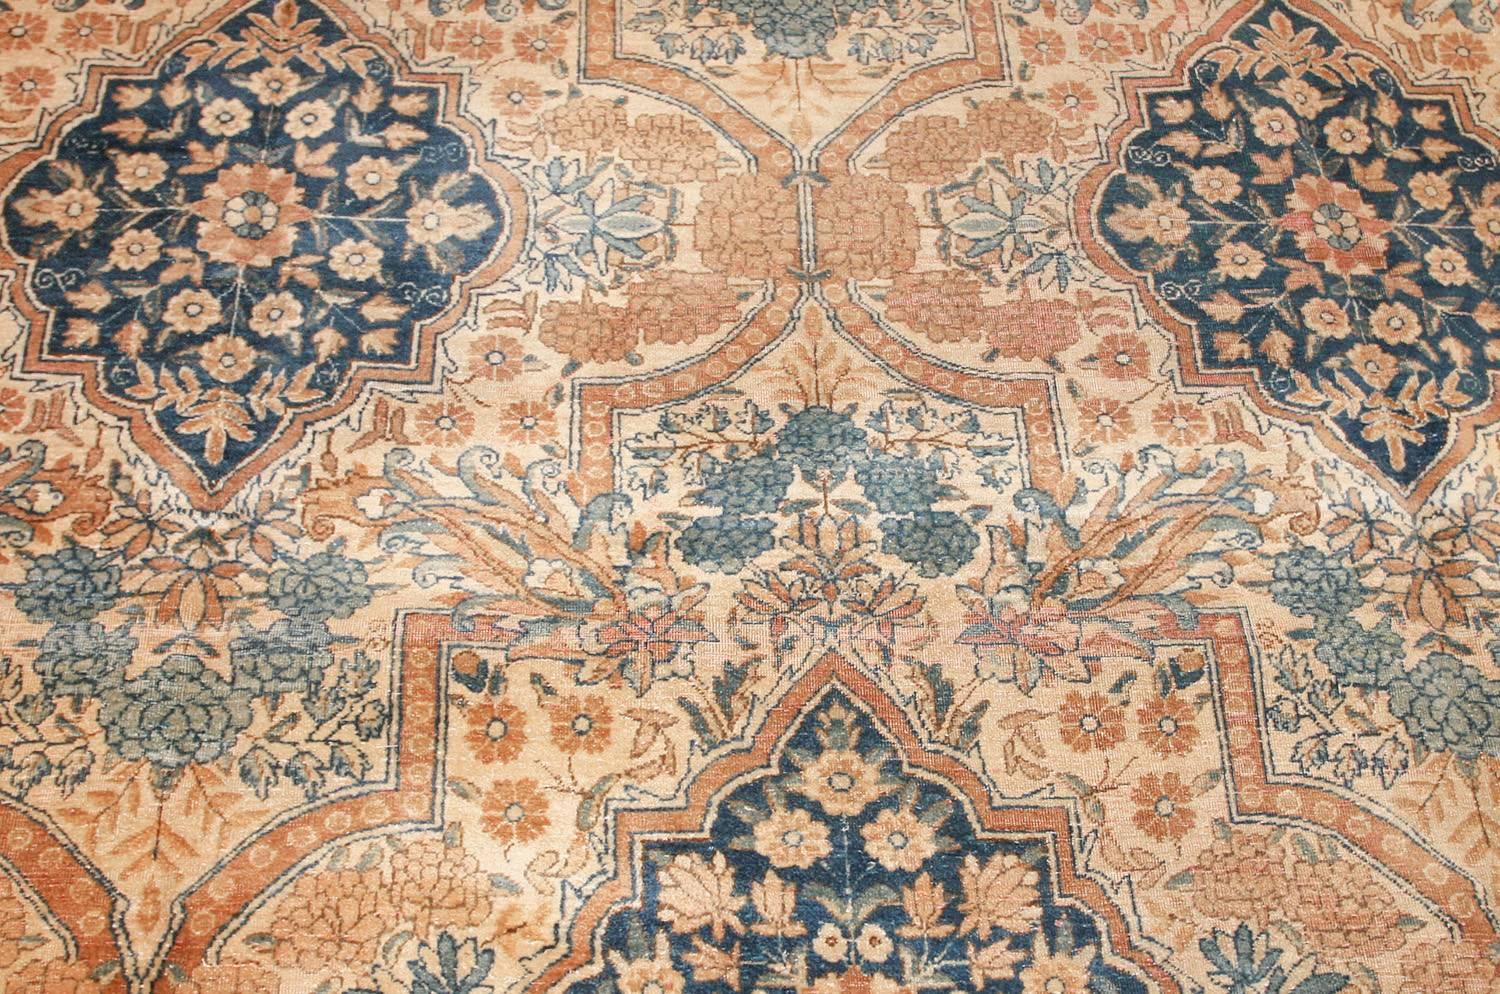 Antique Persian Kerman Rug, Country of Origin: Persia, Circa Date: Early 20th Century.  Size: 10 ft 6 in x 14 ft 2 in (3.2 m x 4.32 m) 

Floral garlands, wreaths and arching swags featuring Kerman’s precisely shaded carnation blossoms decorate this